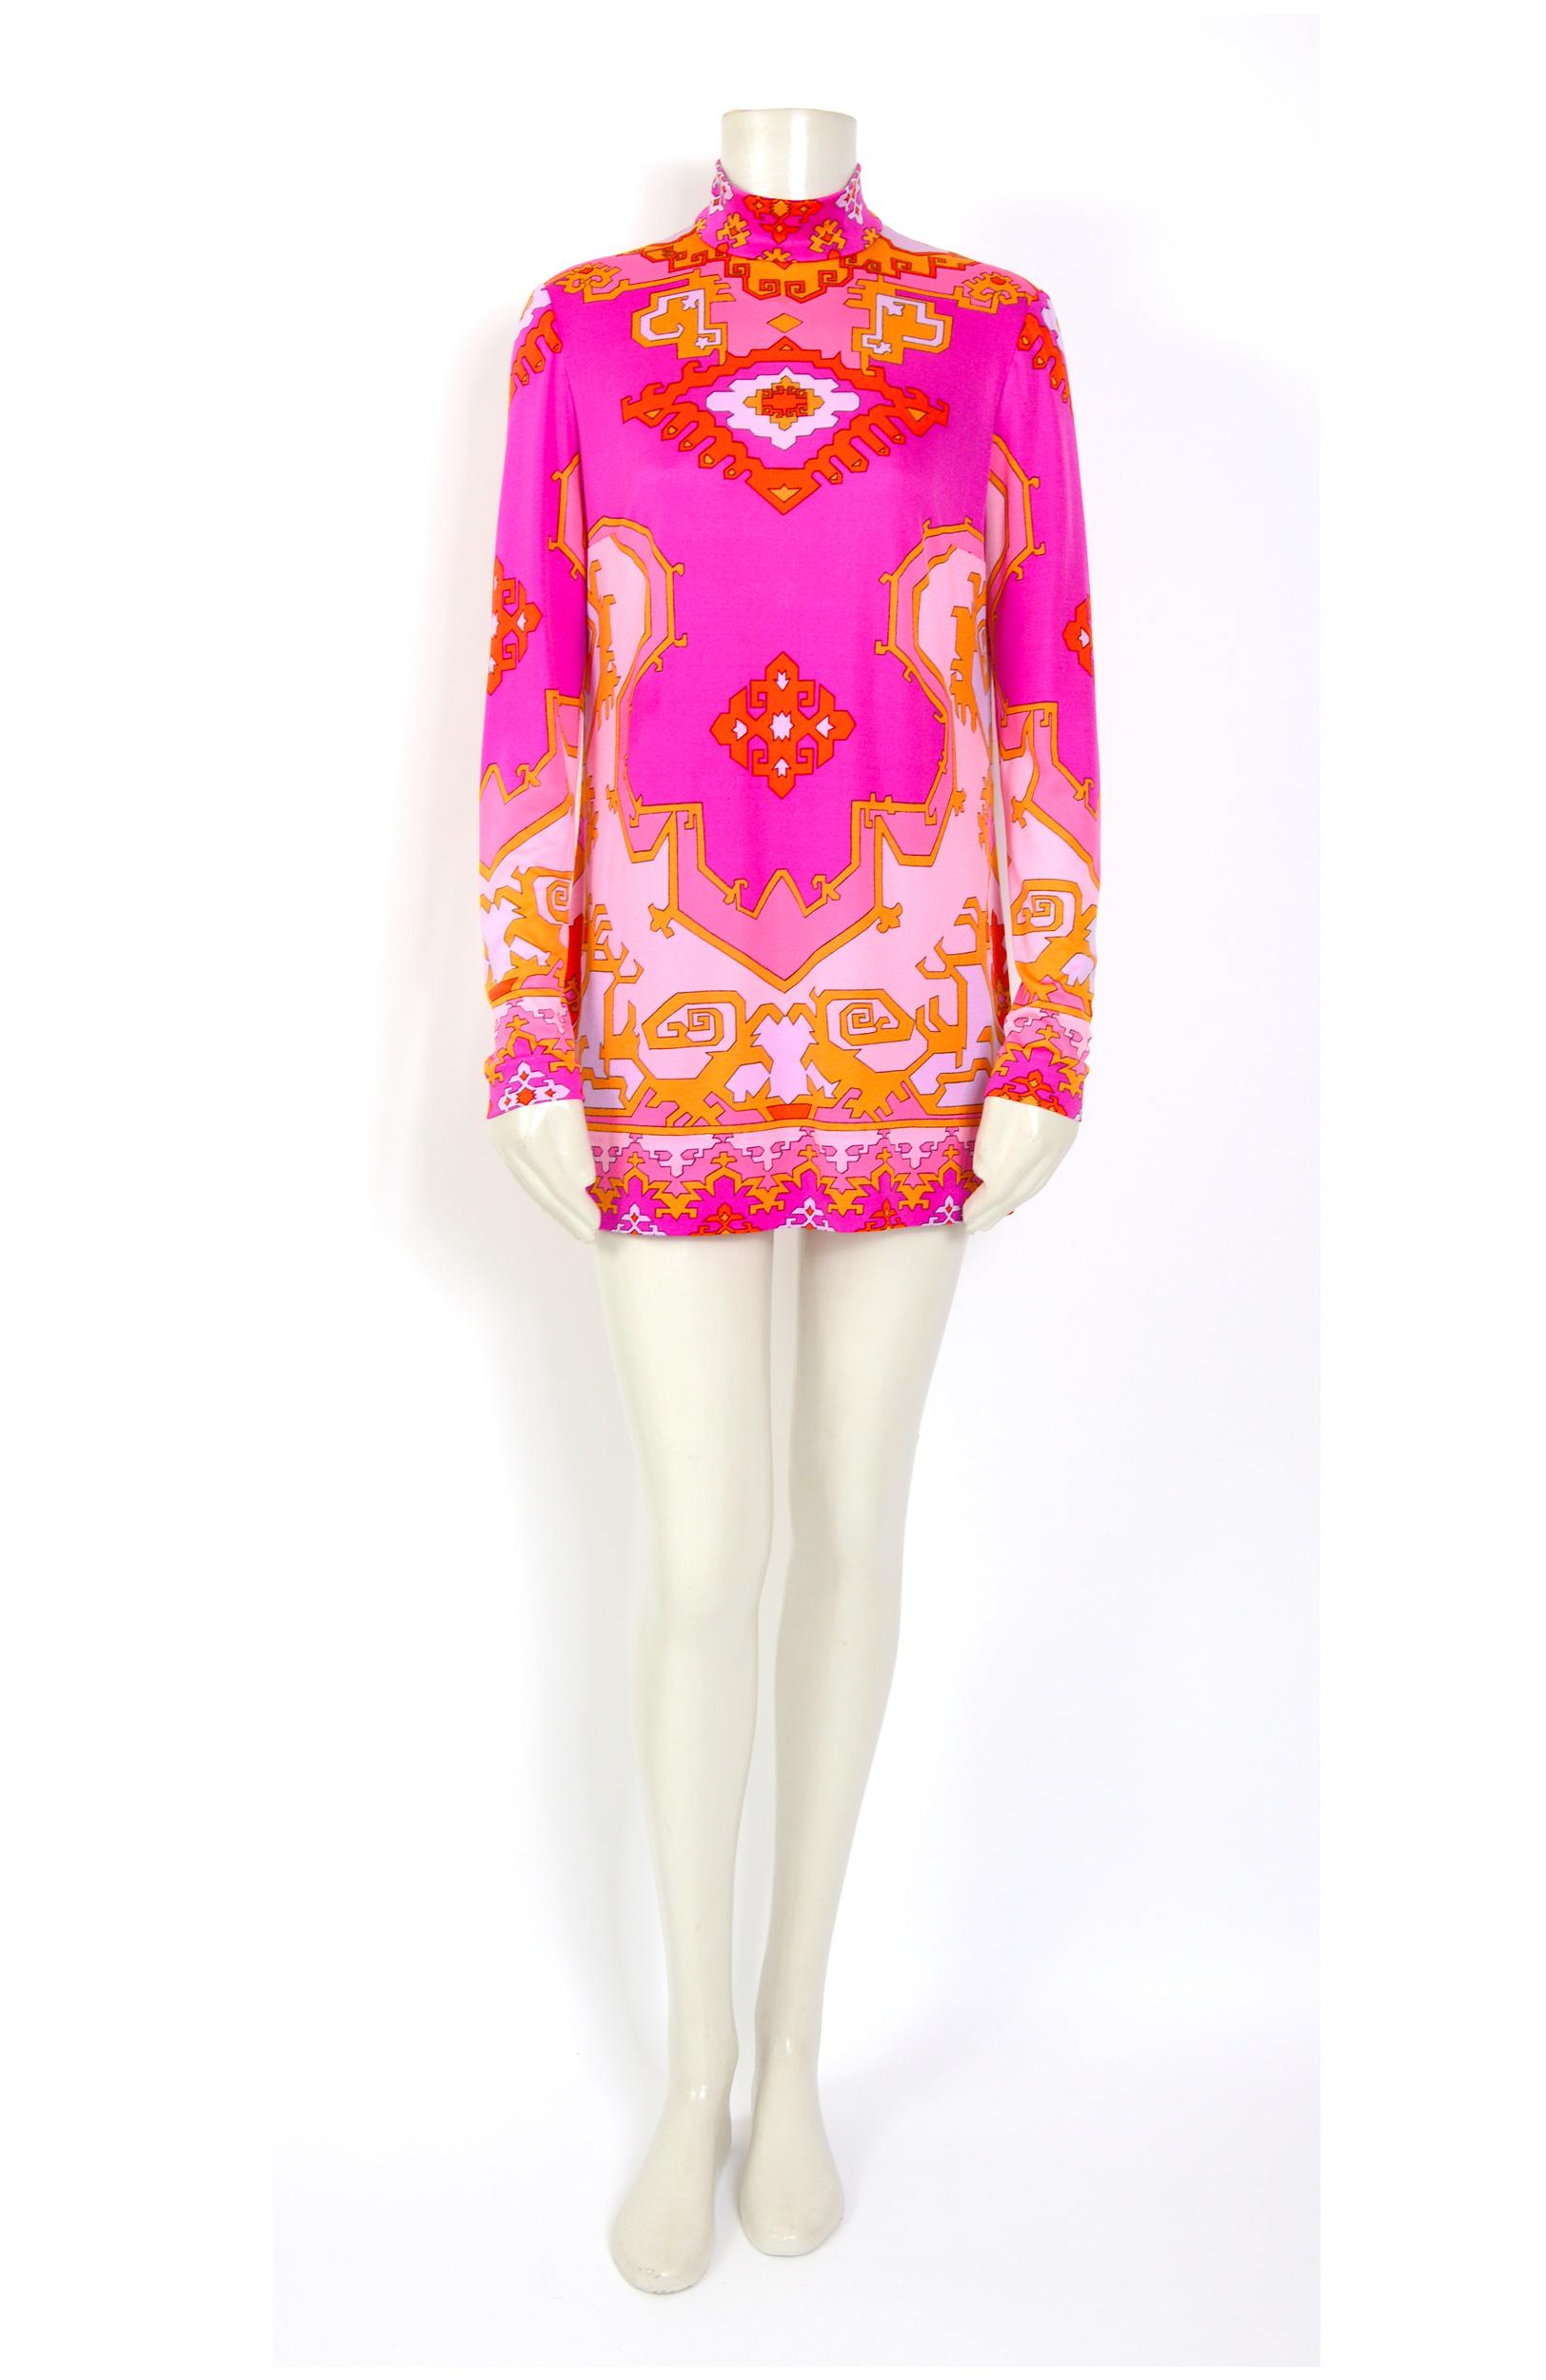 Vintage 1960s silk jersey pink graphic print mini dress or tunic blouse.
I love this piece and such a rare find in this color.
Measurements that are taken flat:
Ua to Ua 19inch/48cm(x2) - Waist 19inch/48cm(x2) - Hip 21inch/53cm(x2) - Sleeve